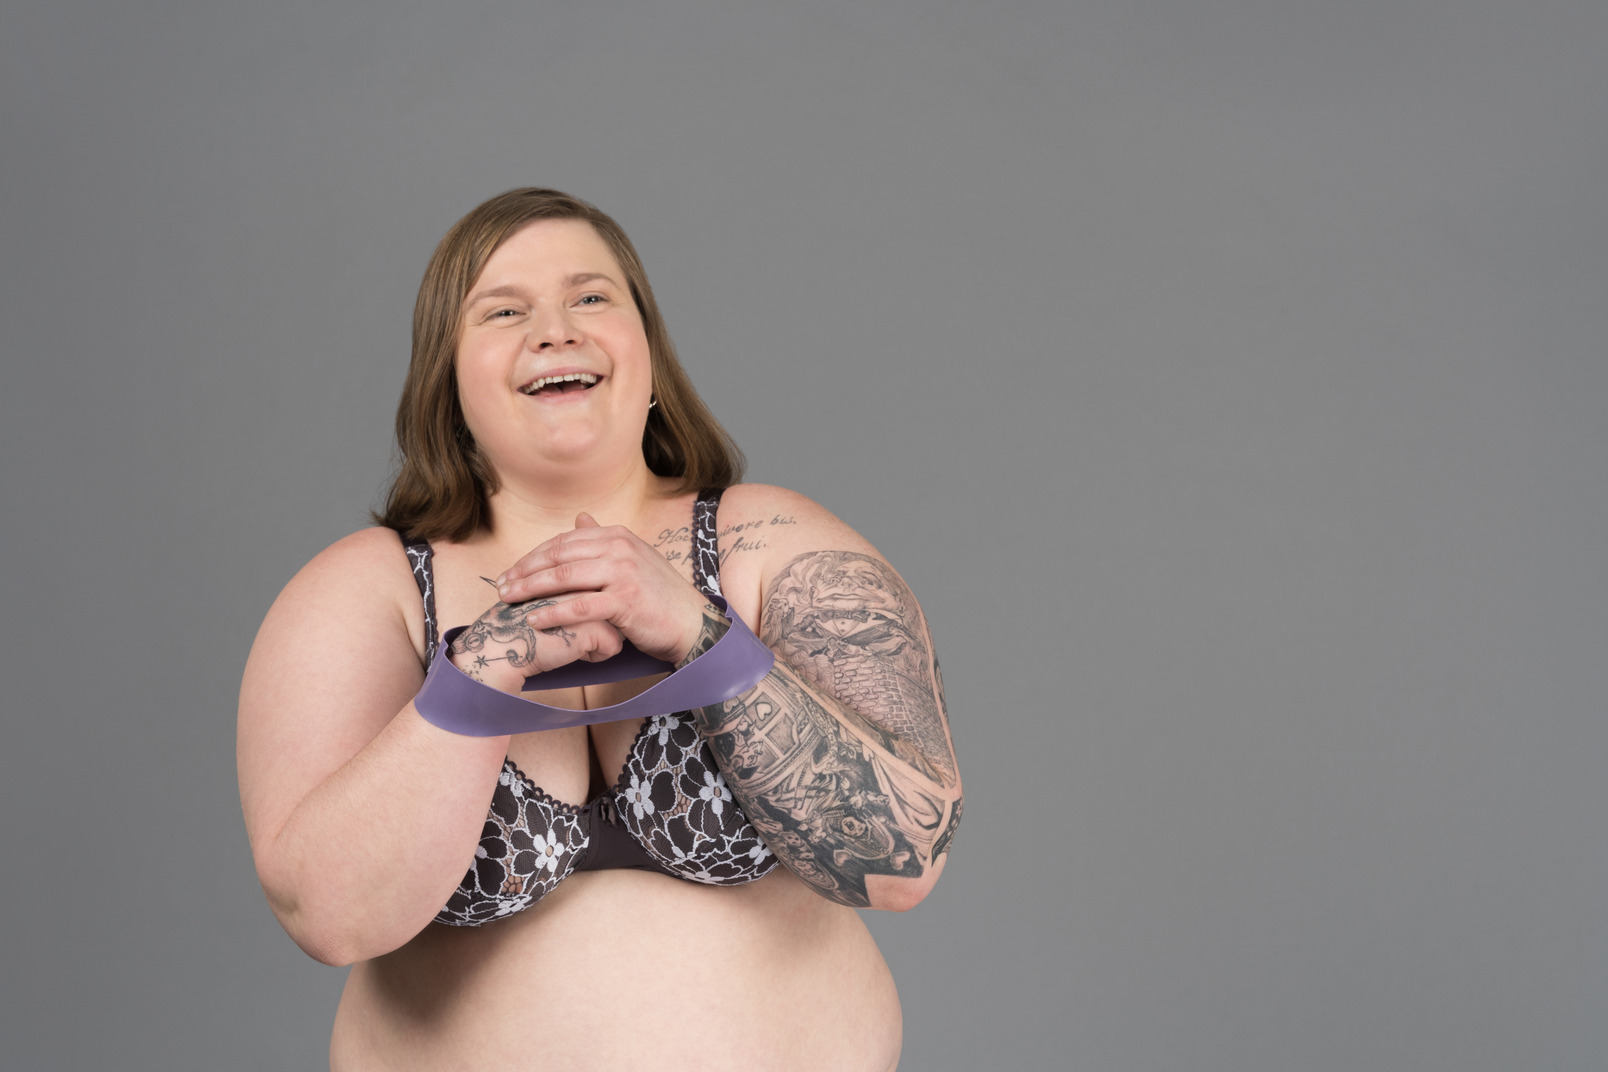 Plump laughing woman holding gymnastic rubber ring